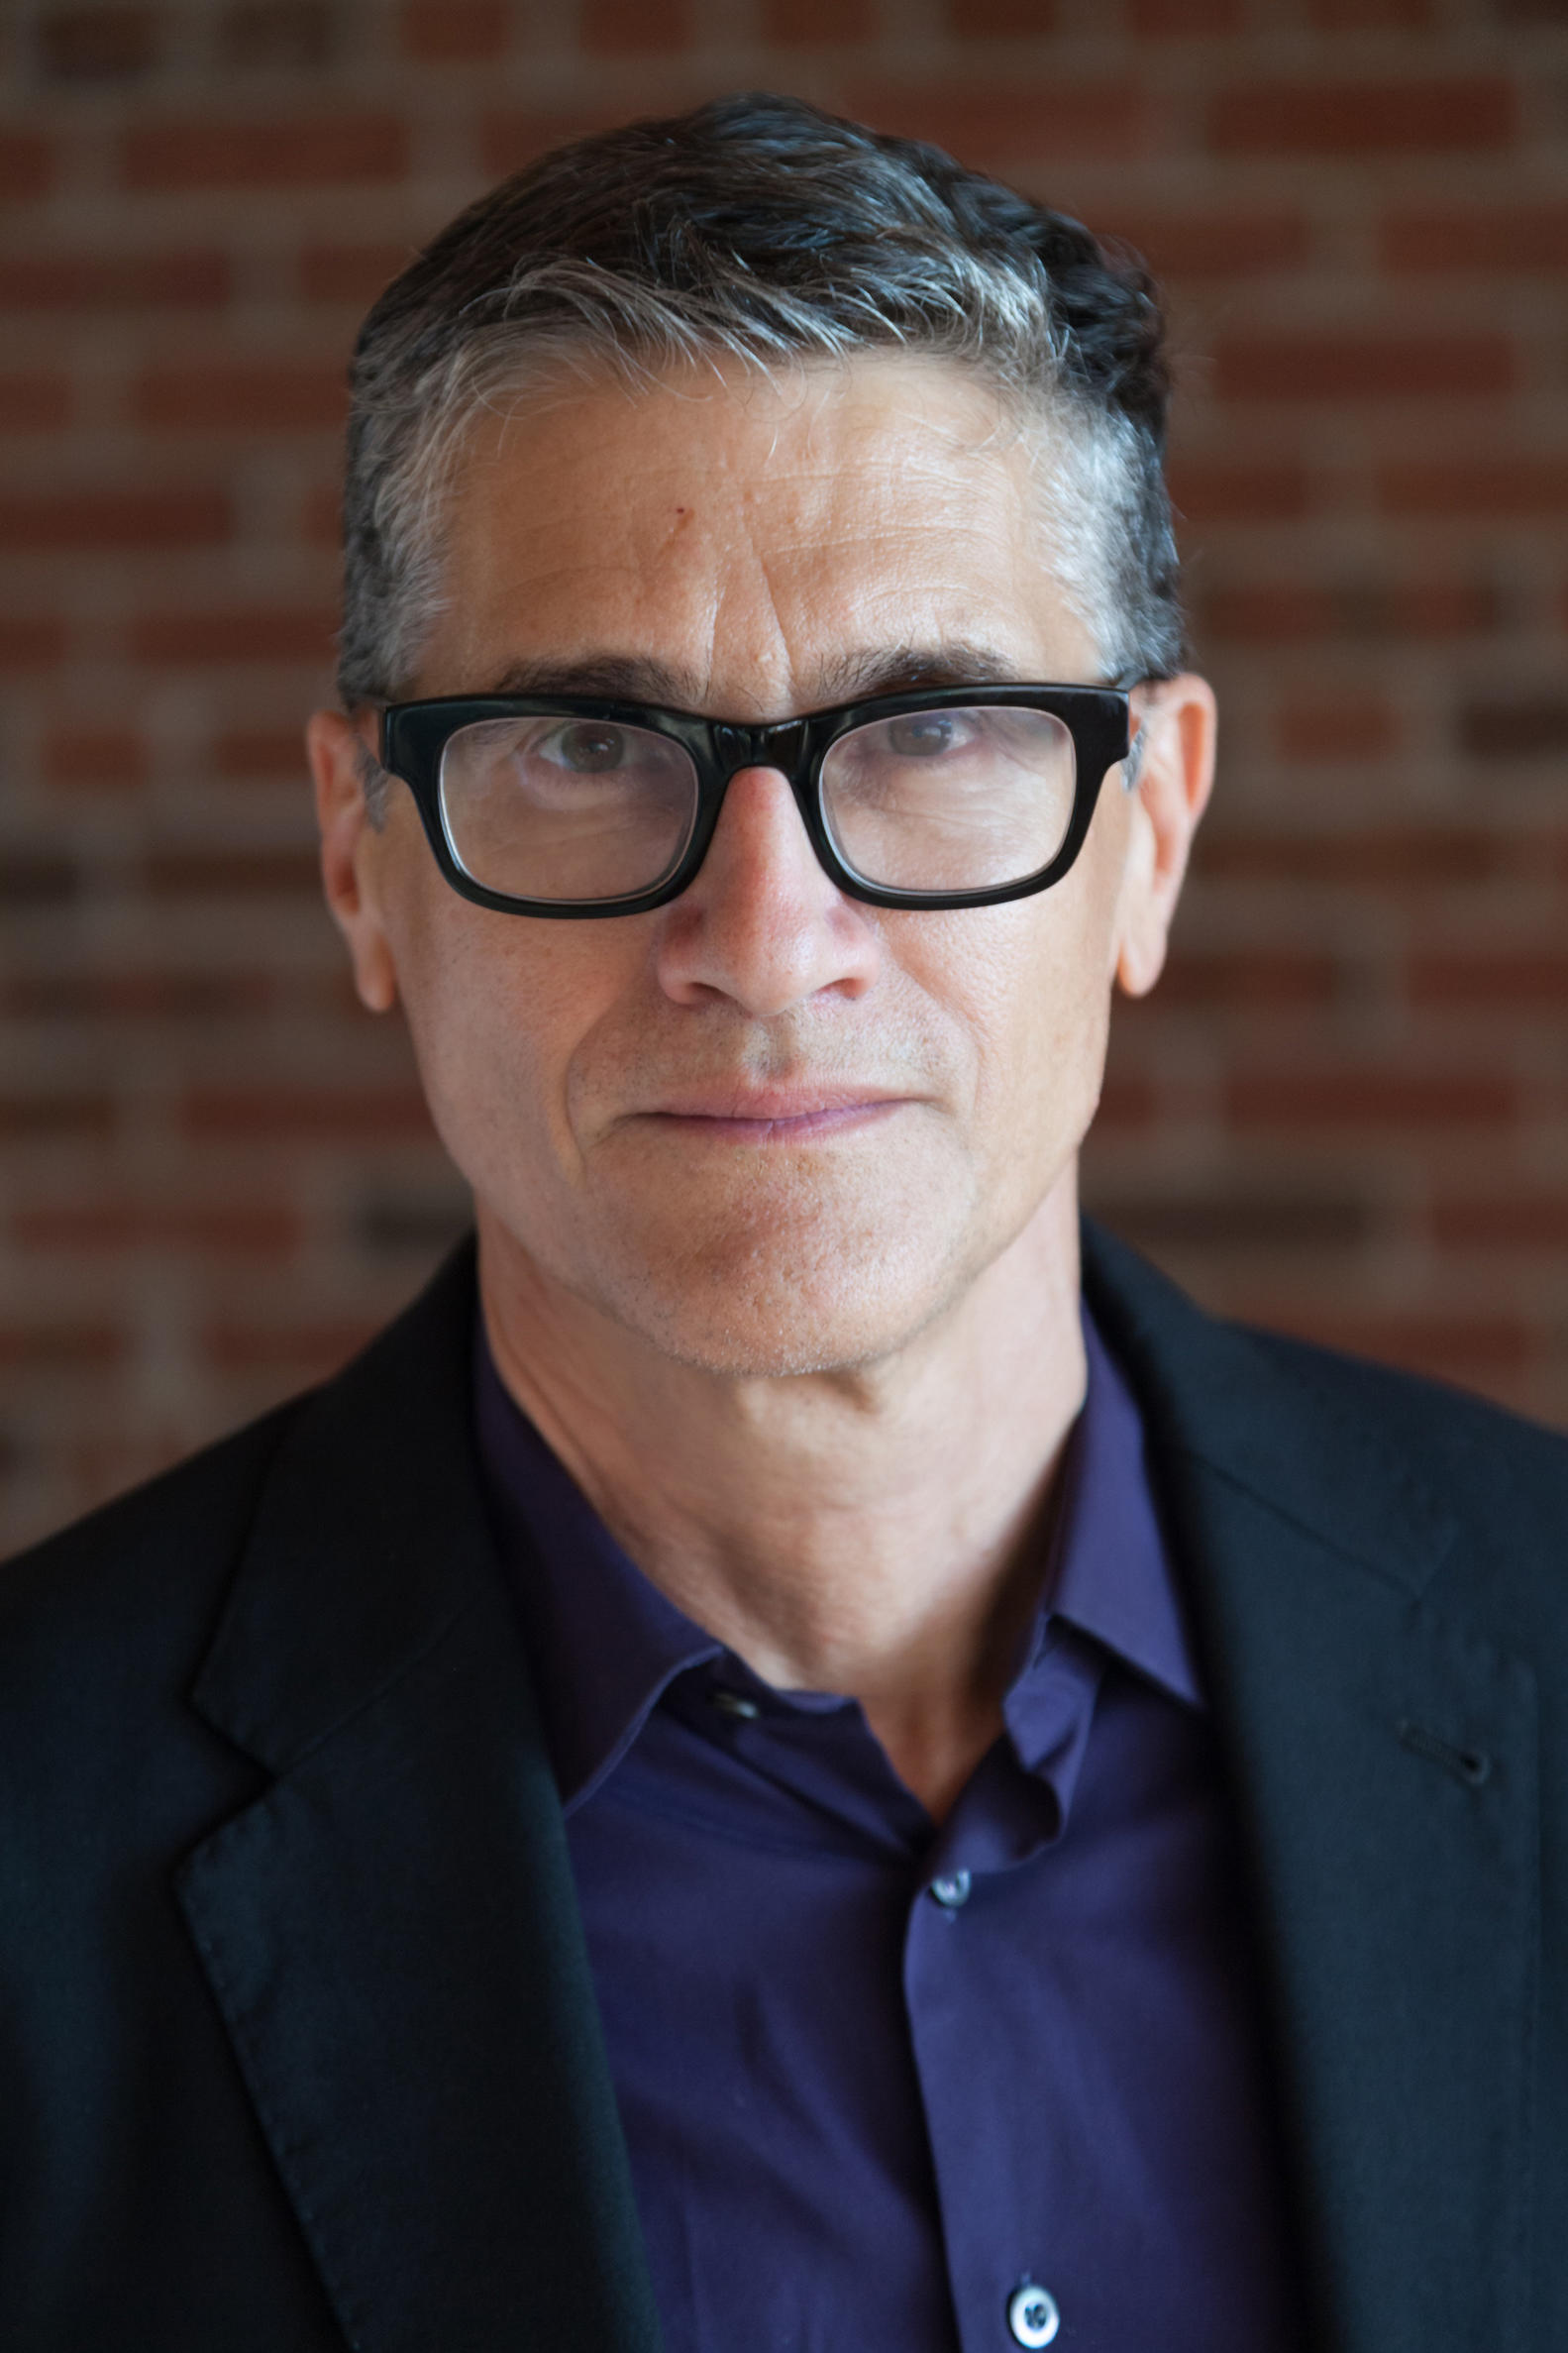 Headshot of man with greying dark hair and glasses wearing a purple shir and black jacket 